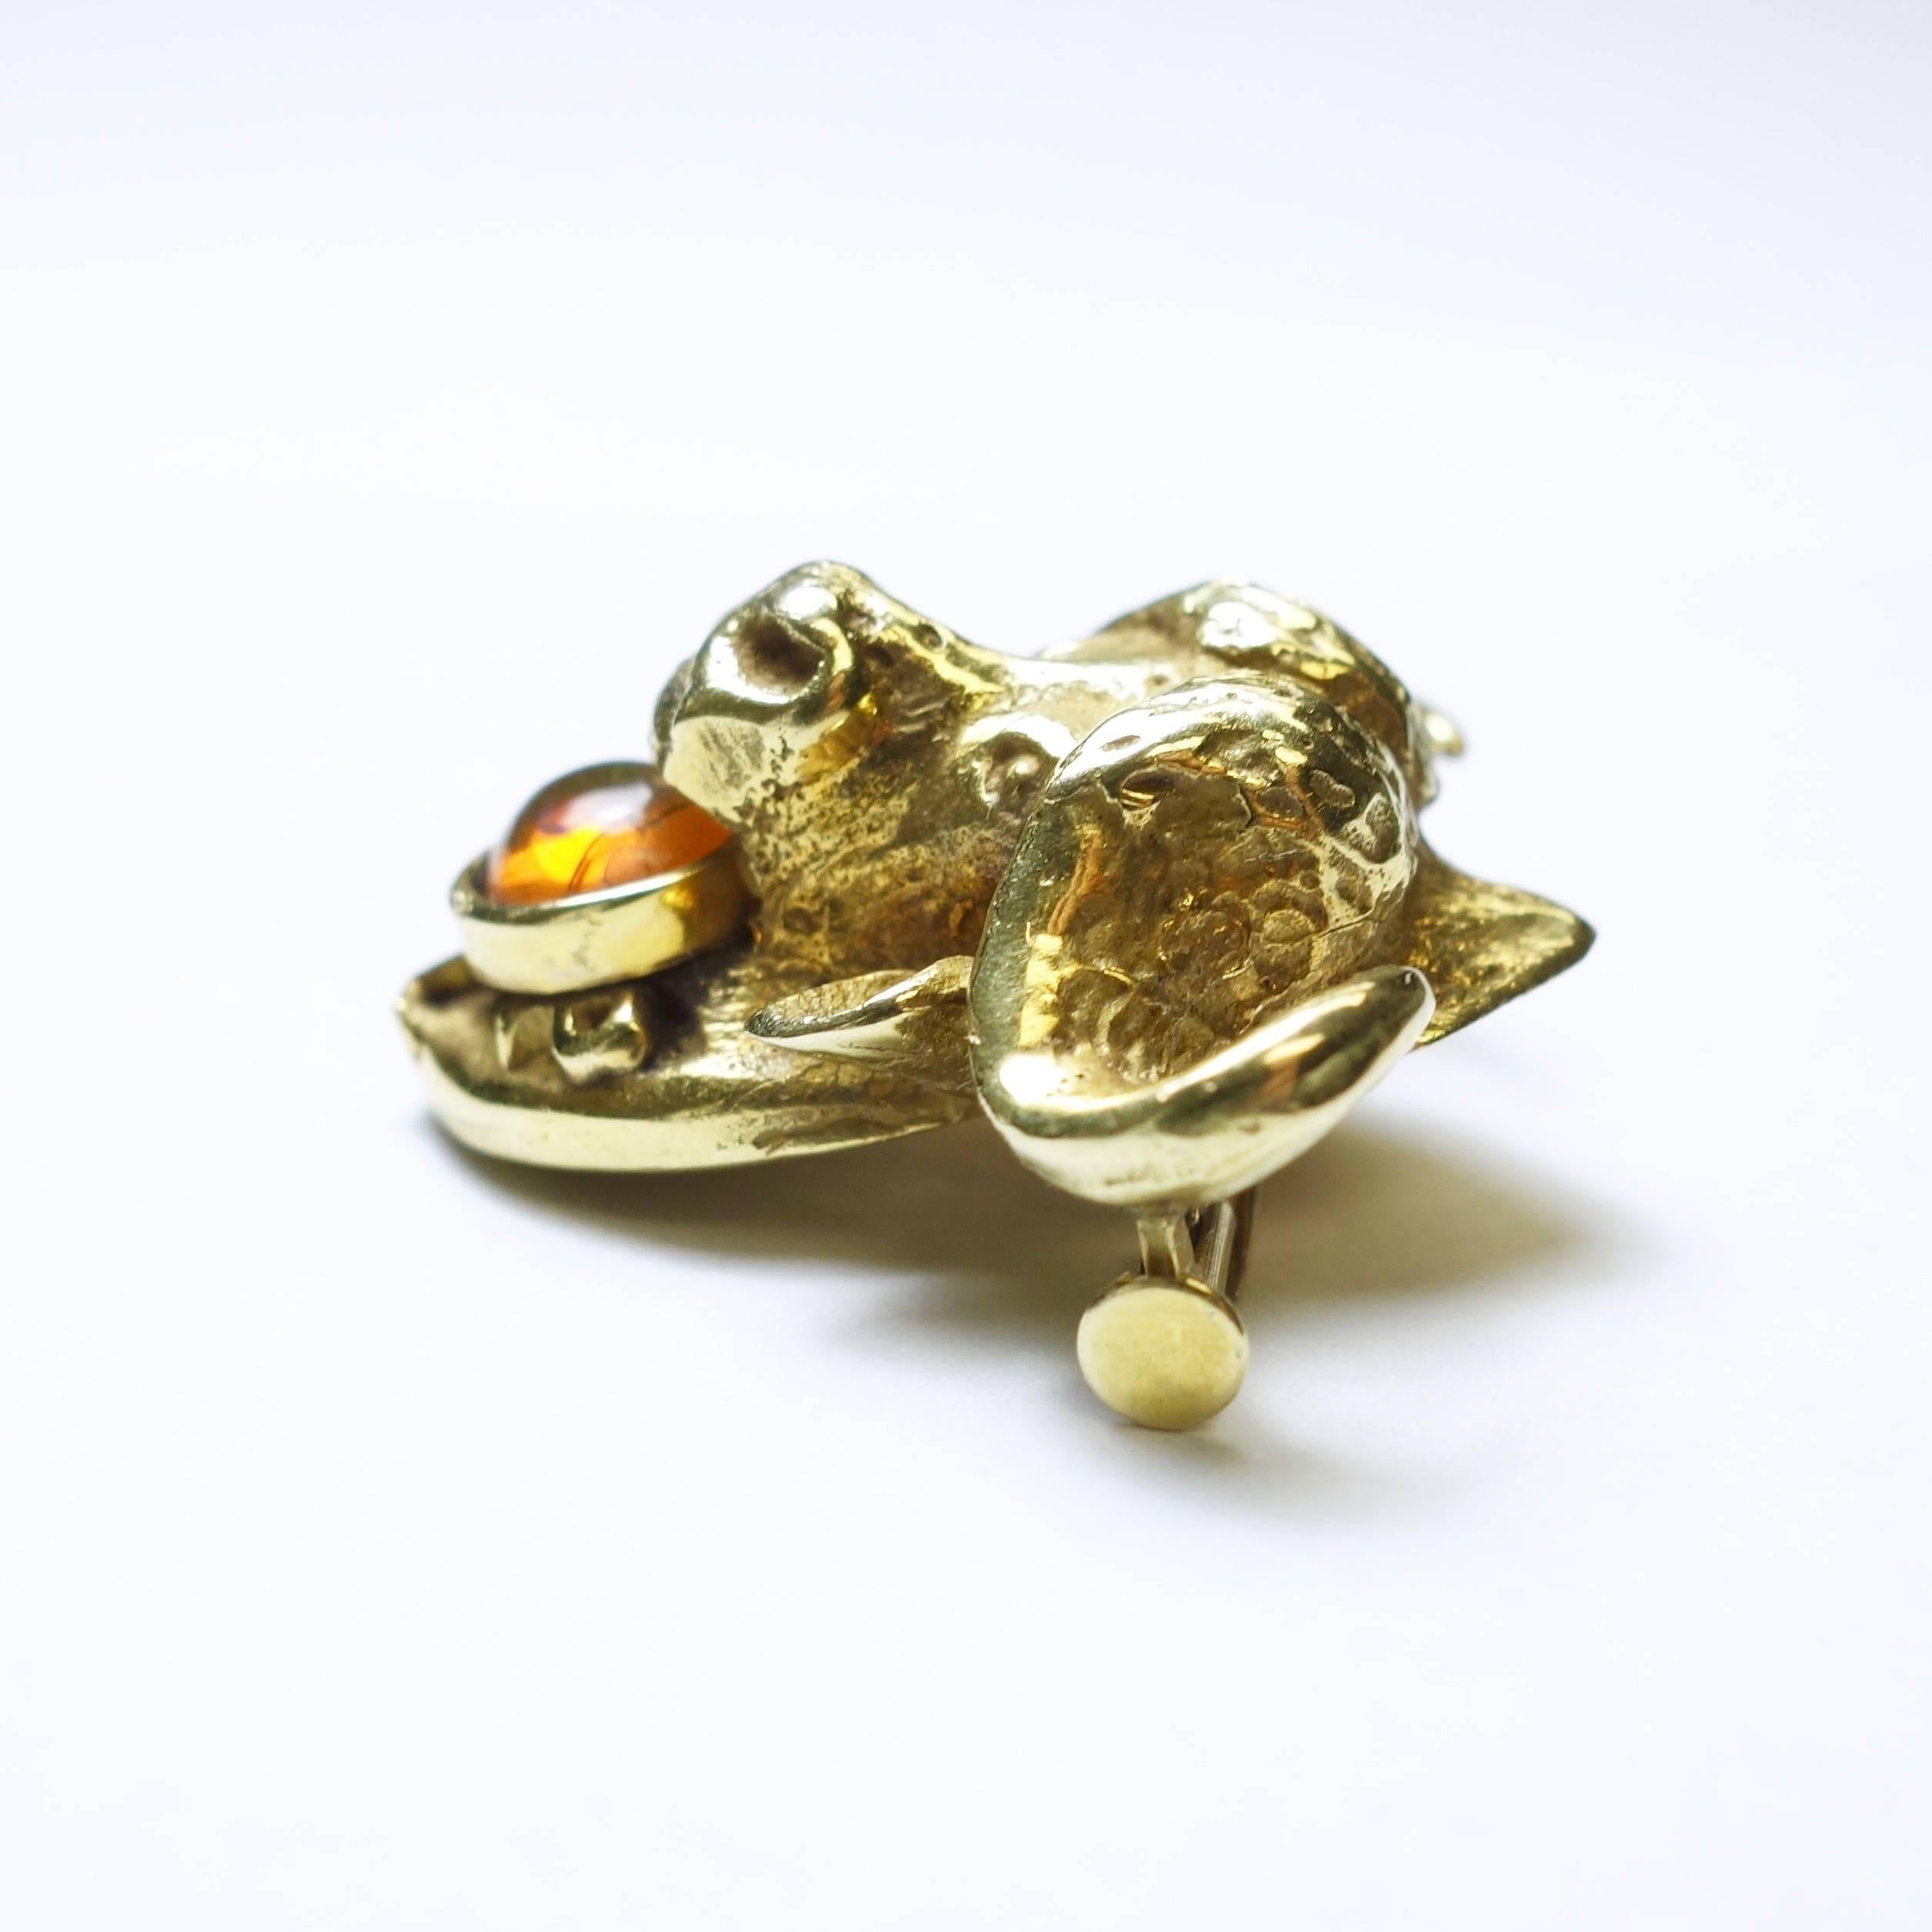 Crafted in 18K yellow gold the brooch features a water buffalo's head accented with a round cabochon crystal opal and J L P initials. The opal has some fractures but not chipped. 
Measurements: W 22.6mm x H 25.5 mm
Weight: 10.4 grams